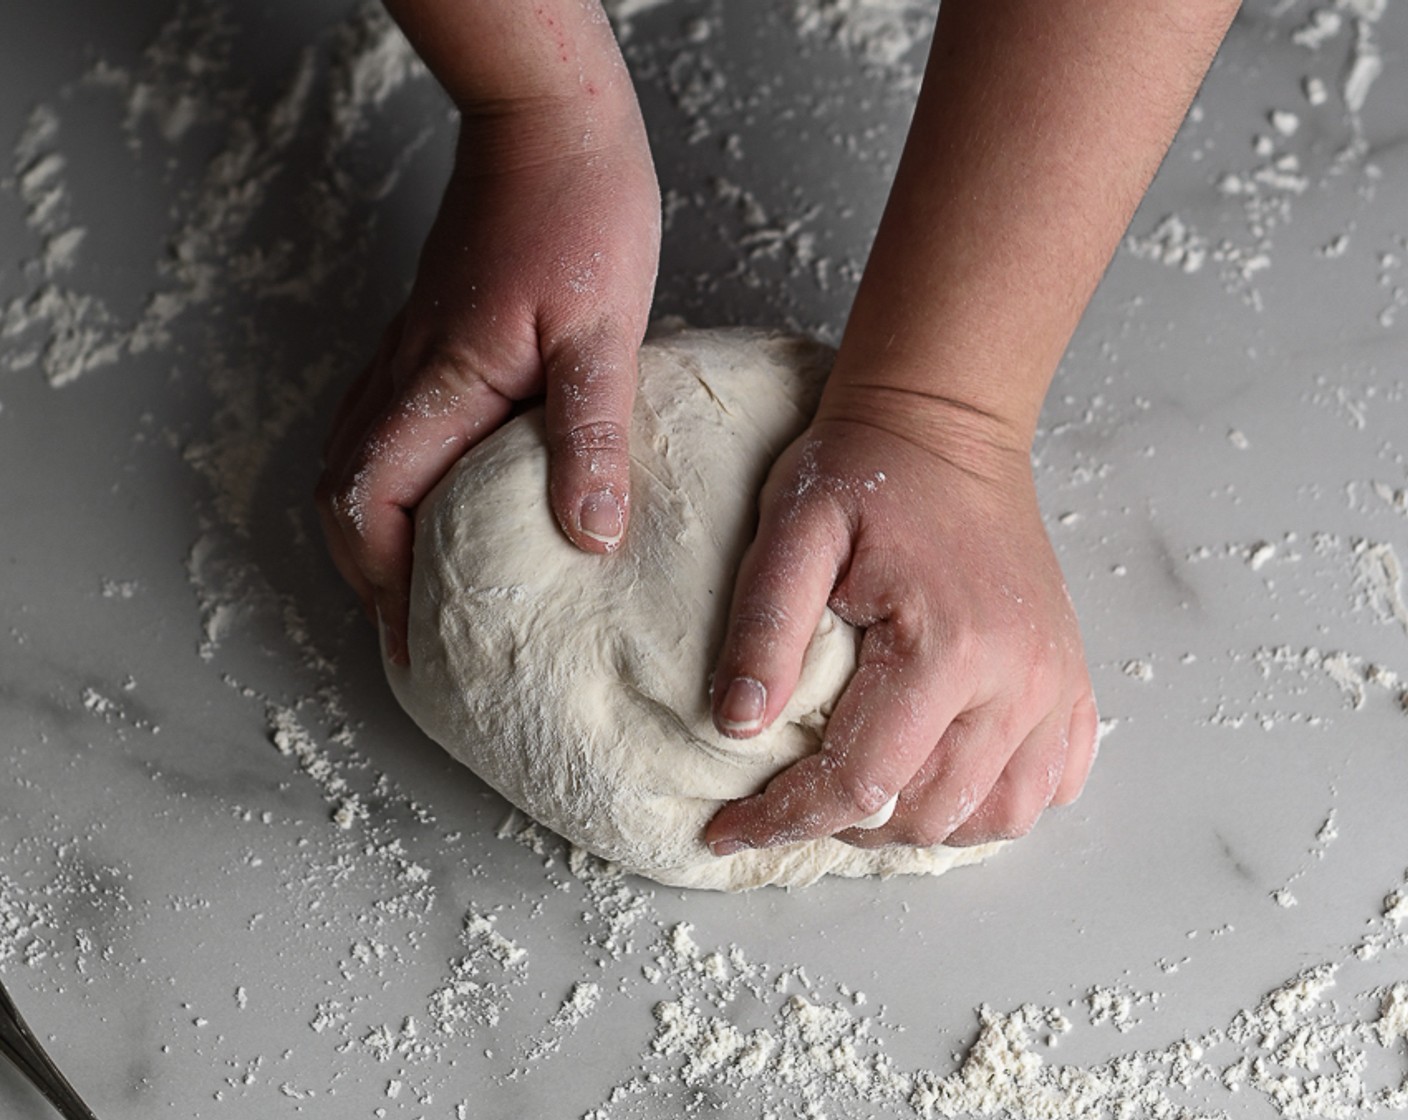 step 3 Using hands, mix the water into the flour until it forms a dough. Turn out onto a floured surface and knead until smooth.